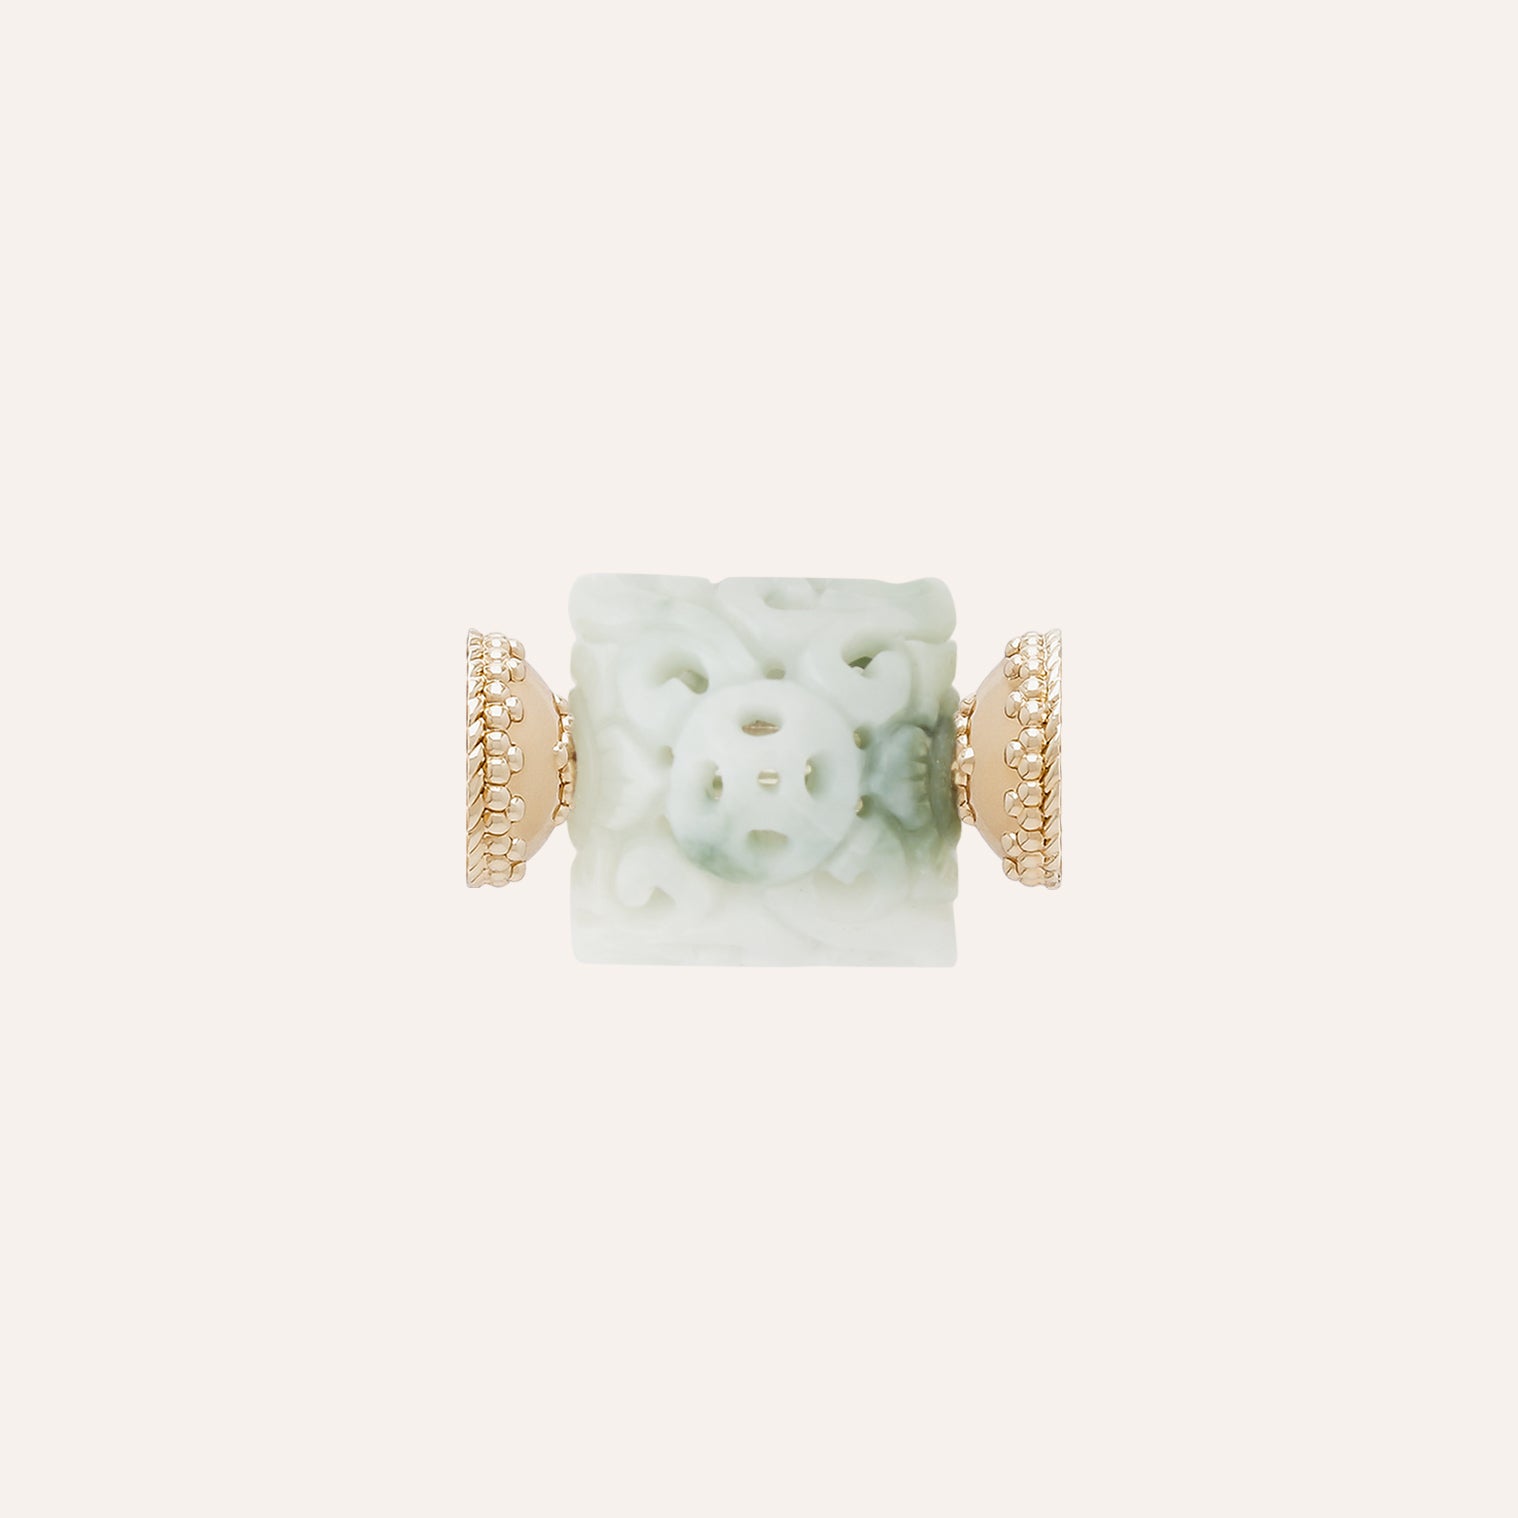 Carved White & Green Jade Square Bead Centerpiece